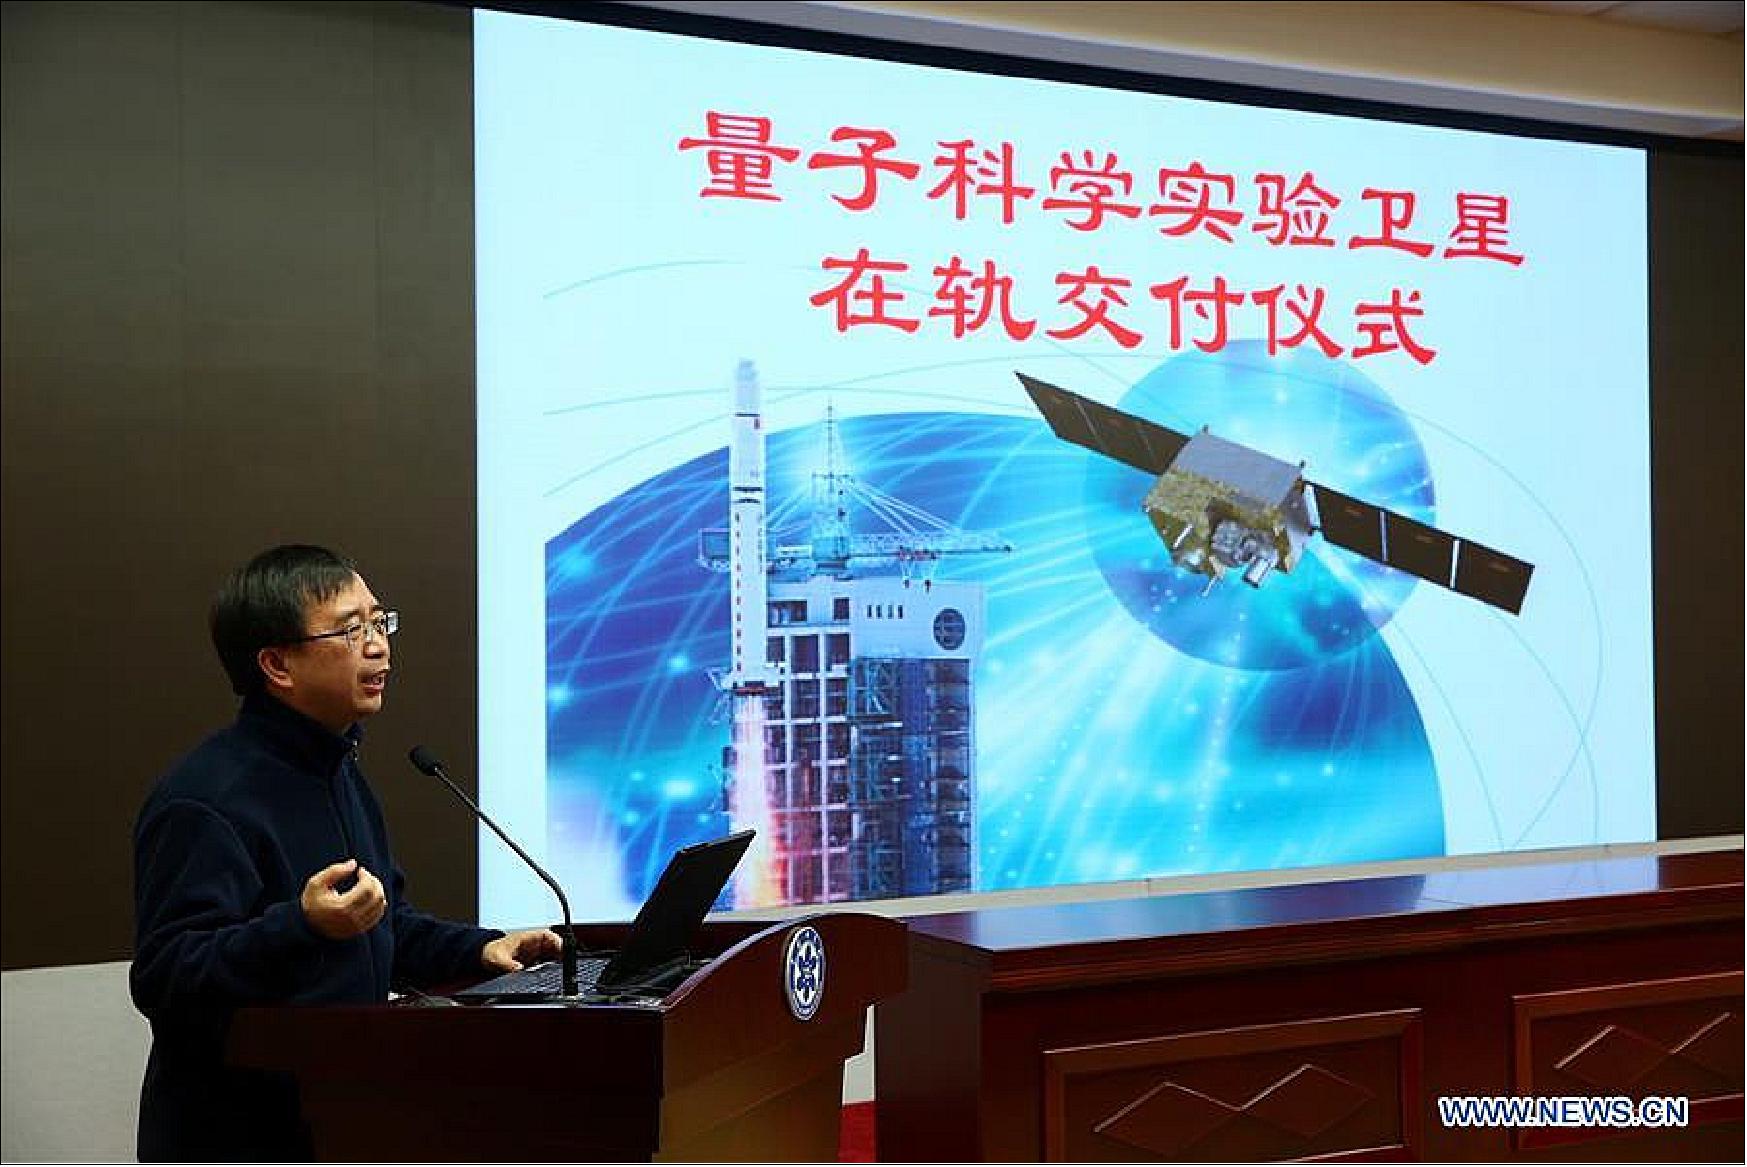 Figure 10: On Jan. 18, 2017, Jianwei Pan, chief scientist of the QUESS (Quantum Experiments at Space Scale) project of CAS (Chinese Academy of Sciences), addresses a ceremony in Beijing to declare the "Micius"satellite as operational (image credit: Xinhua, Liwang Jin)